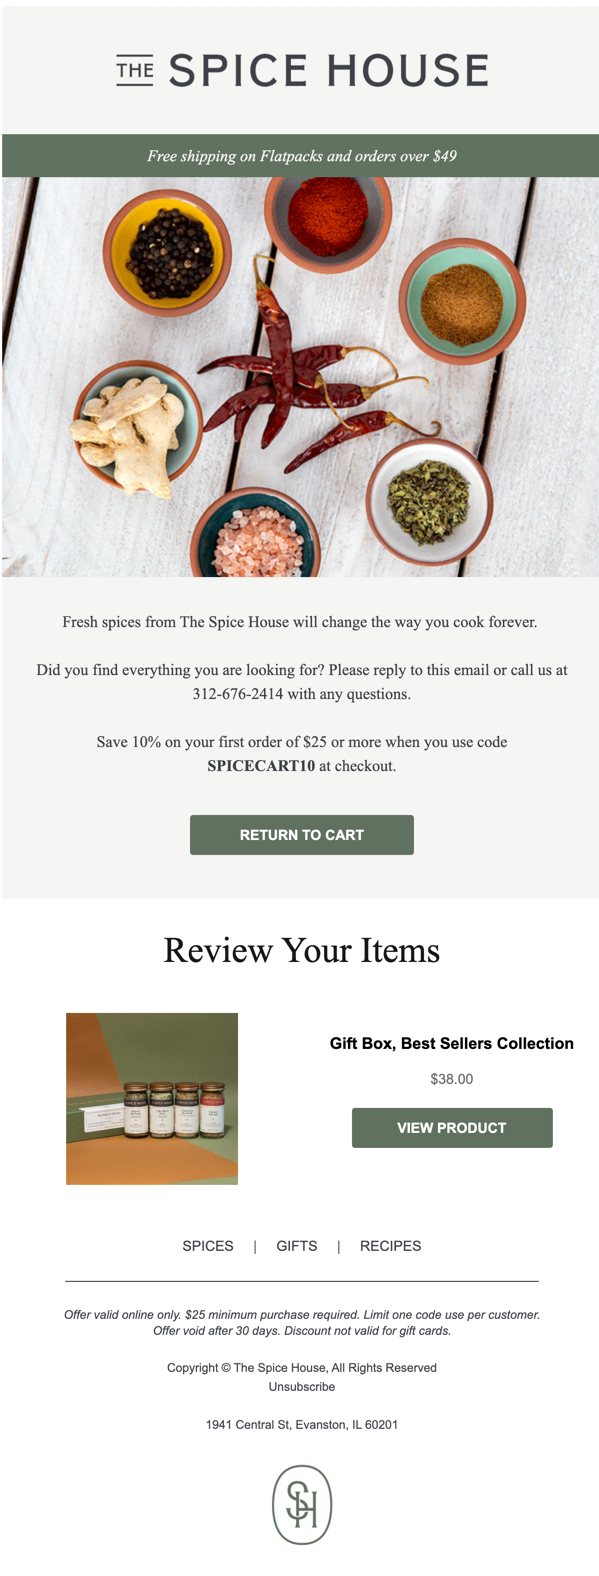 Optimize_your_Abandoned_Cart_Emails_-_The_Spice_House.png